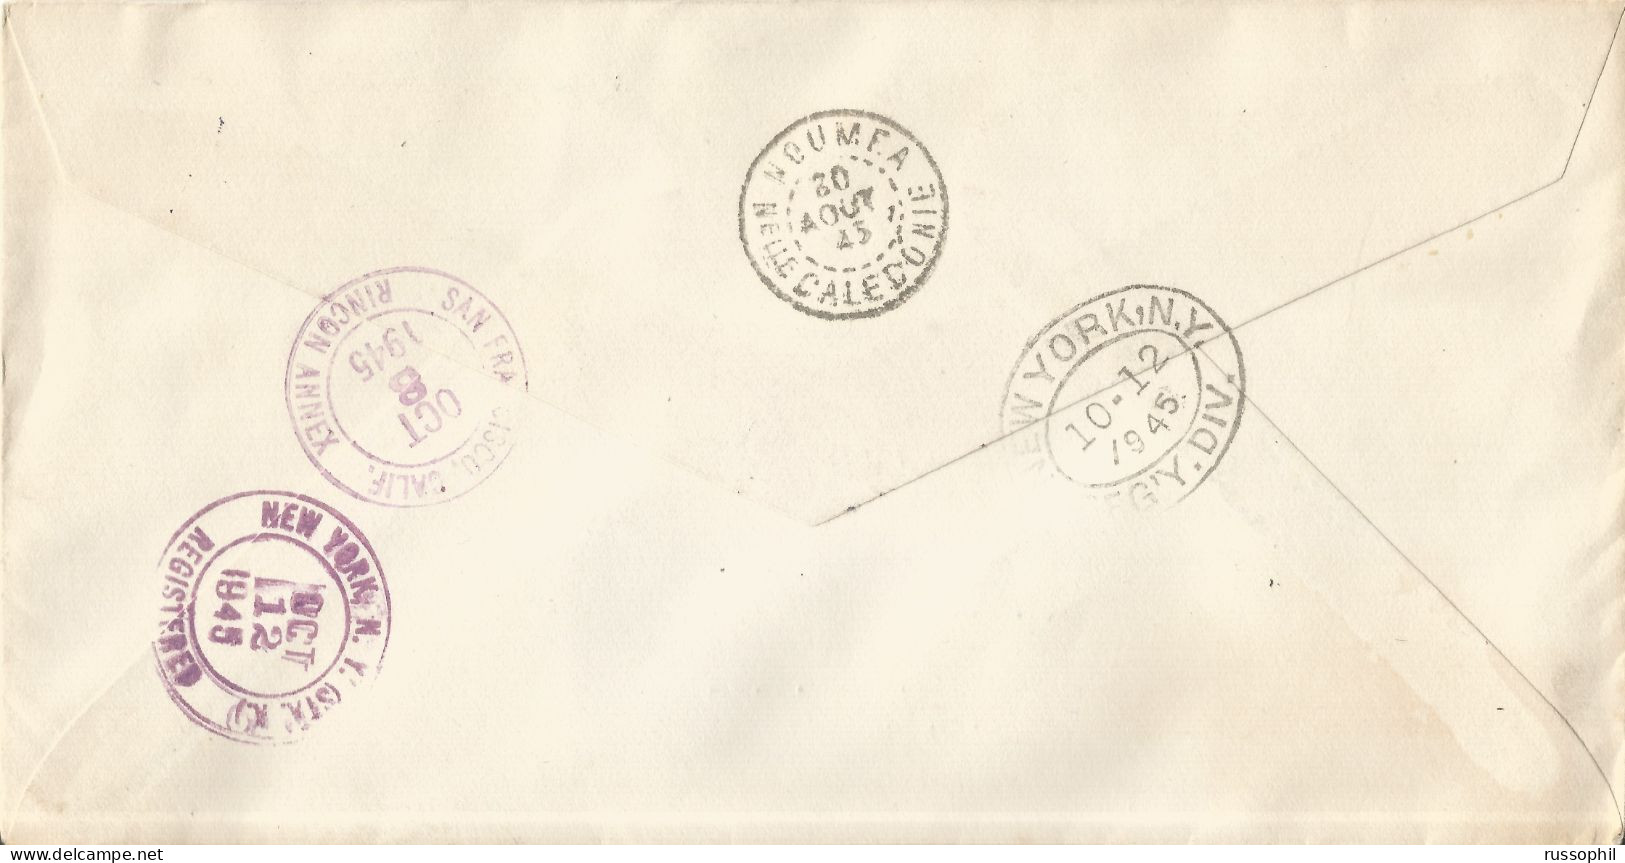 WALLIS AND FUTUNA - 7 STAMP 26 FR FRANKING "LONDON" ISSUE ON REGISTERED COVER TO THE USA - 1945 - Storia Postale